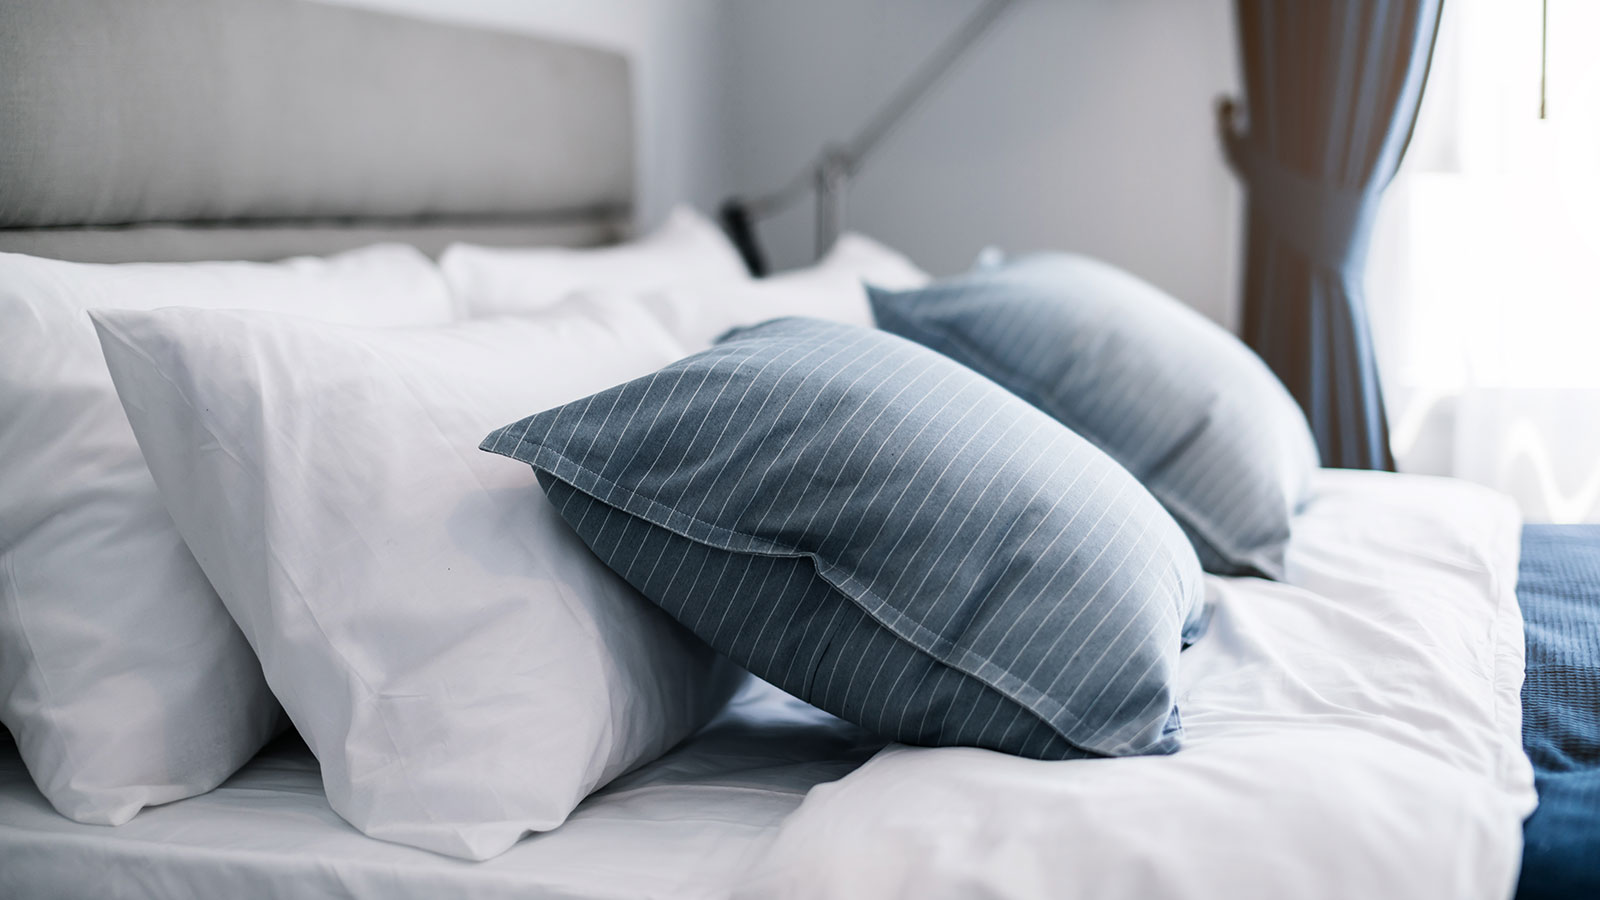 If you sleep with a pillow between your legs — you're smart